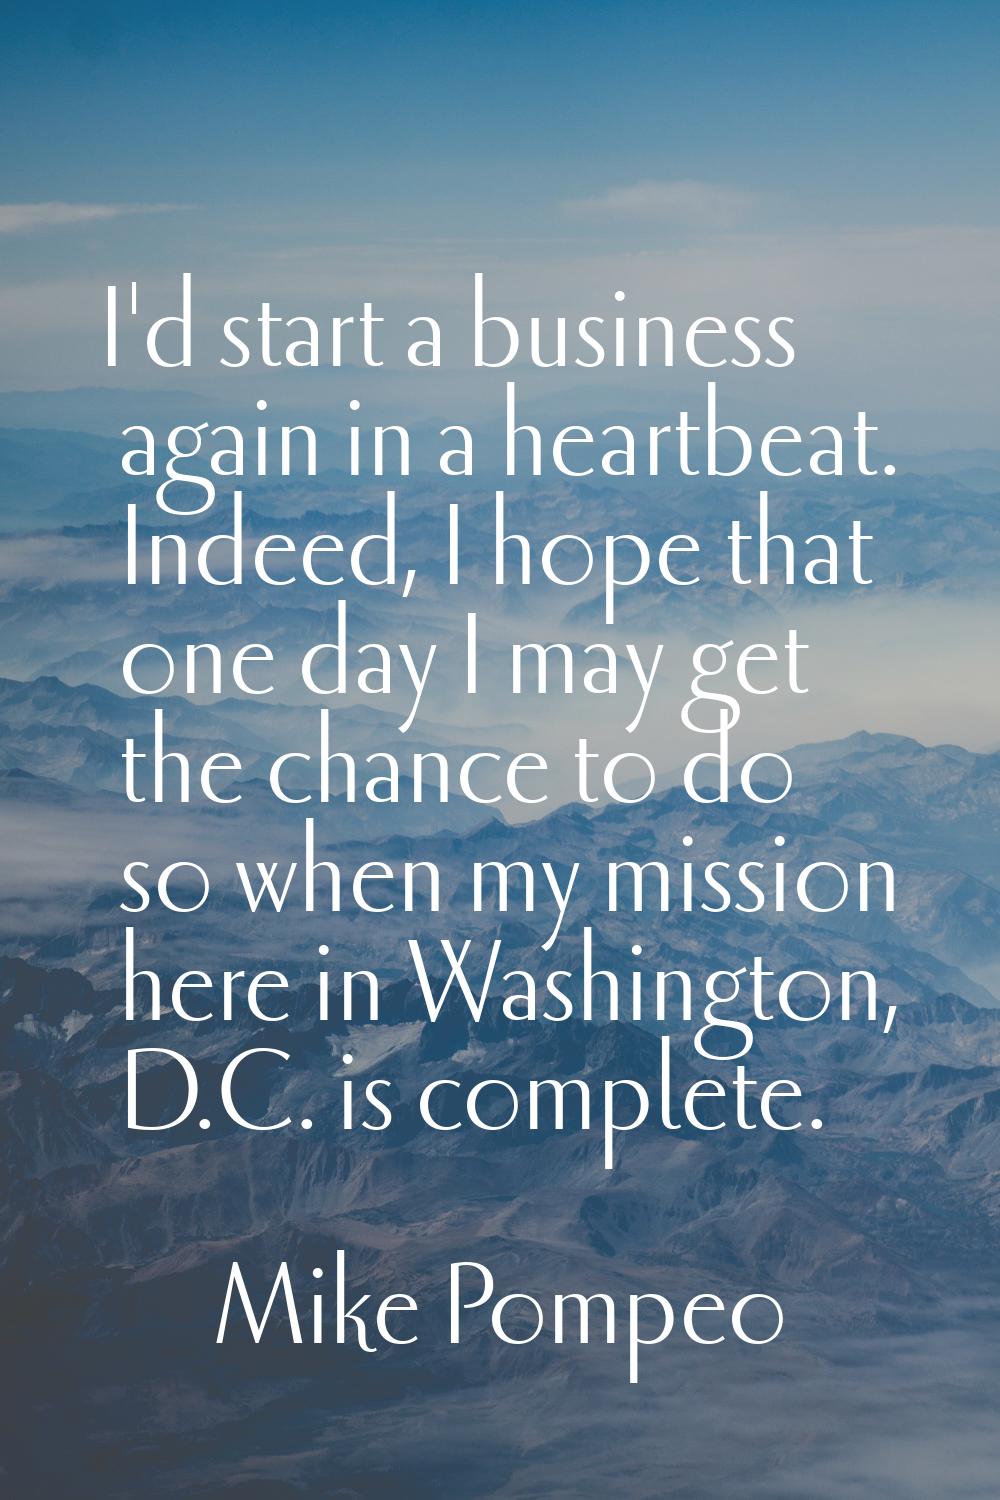 I'd start a business again in a heartbeat. Indeed, I hope that one day I may get the chance to do s